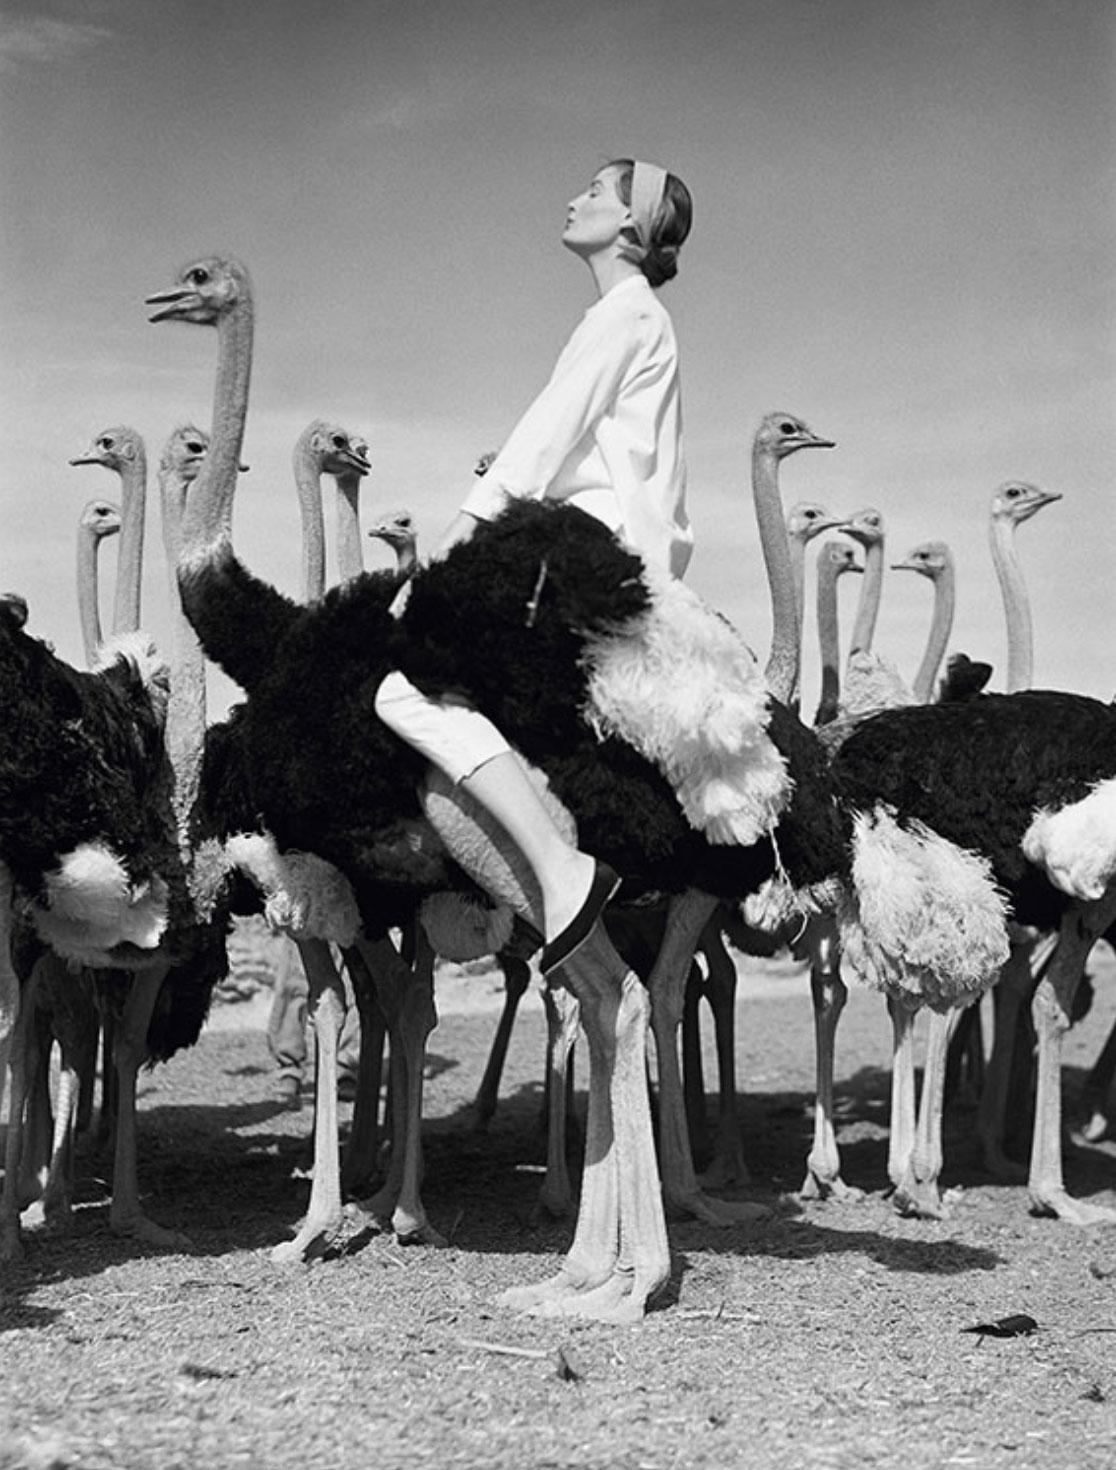 Norman Parkinson
Wenda and Ostriches
1951 (printed later)
C print
20 x 16 inches 
Estate stamped and numbered edition of 21 on verso
with certificate of authenticity from the Norman Parkinson Estate.

Wenda Parkinson wearing knee-buttoned jeans and